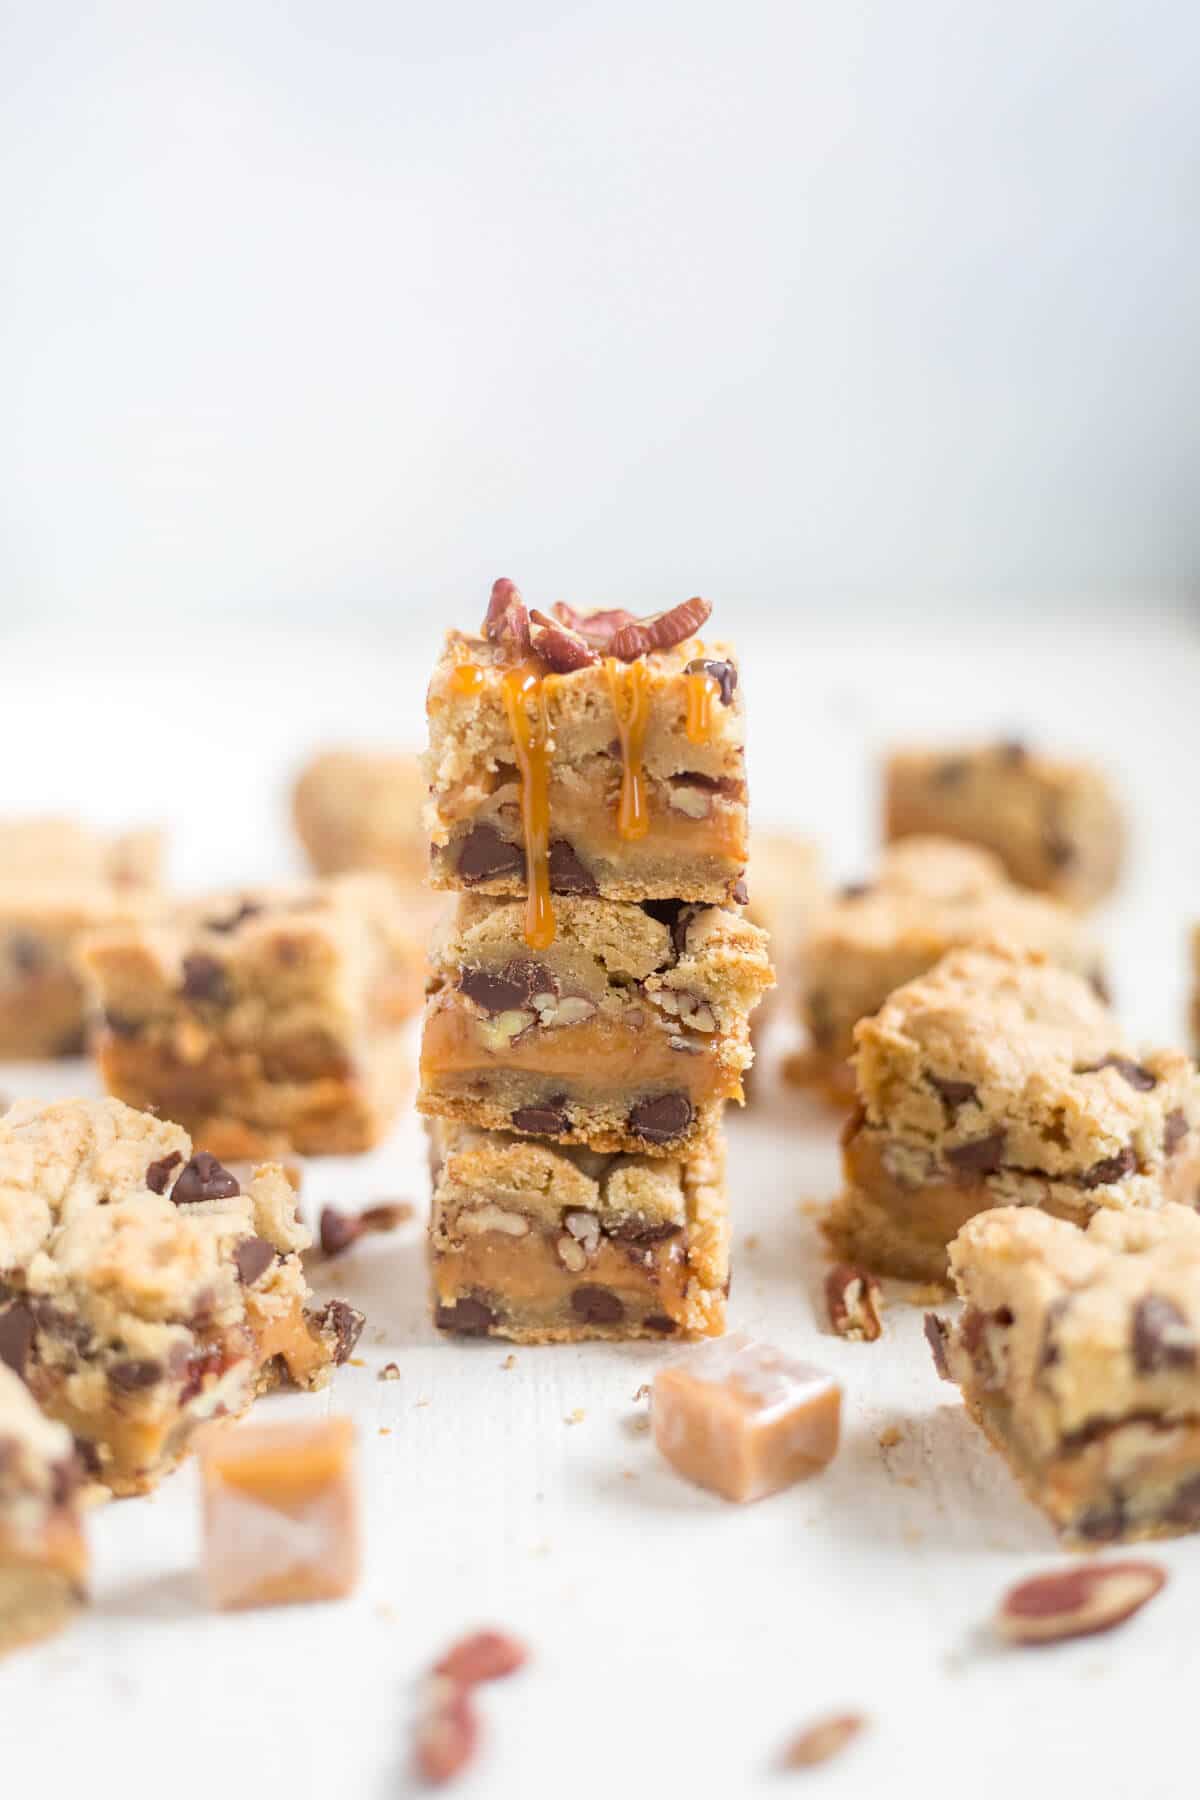 Thick and chewy turtle cookie bars! The base of this recipe is a chocolate chip cookie. You'll split the dough in half and add some caramel and pecans to the middle for an easy, chewy dessert!